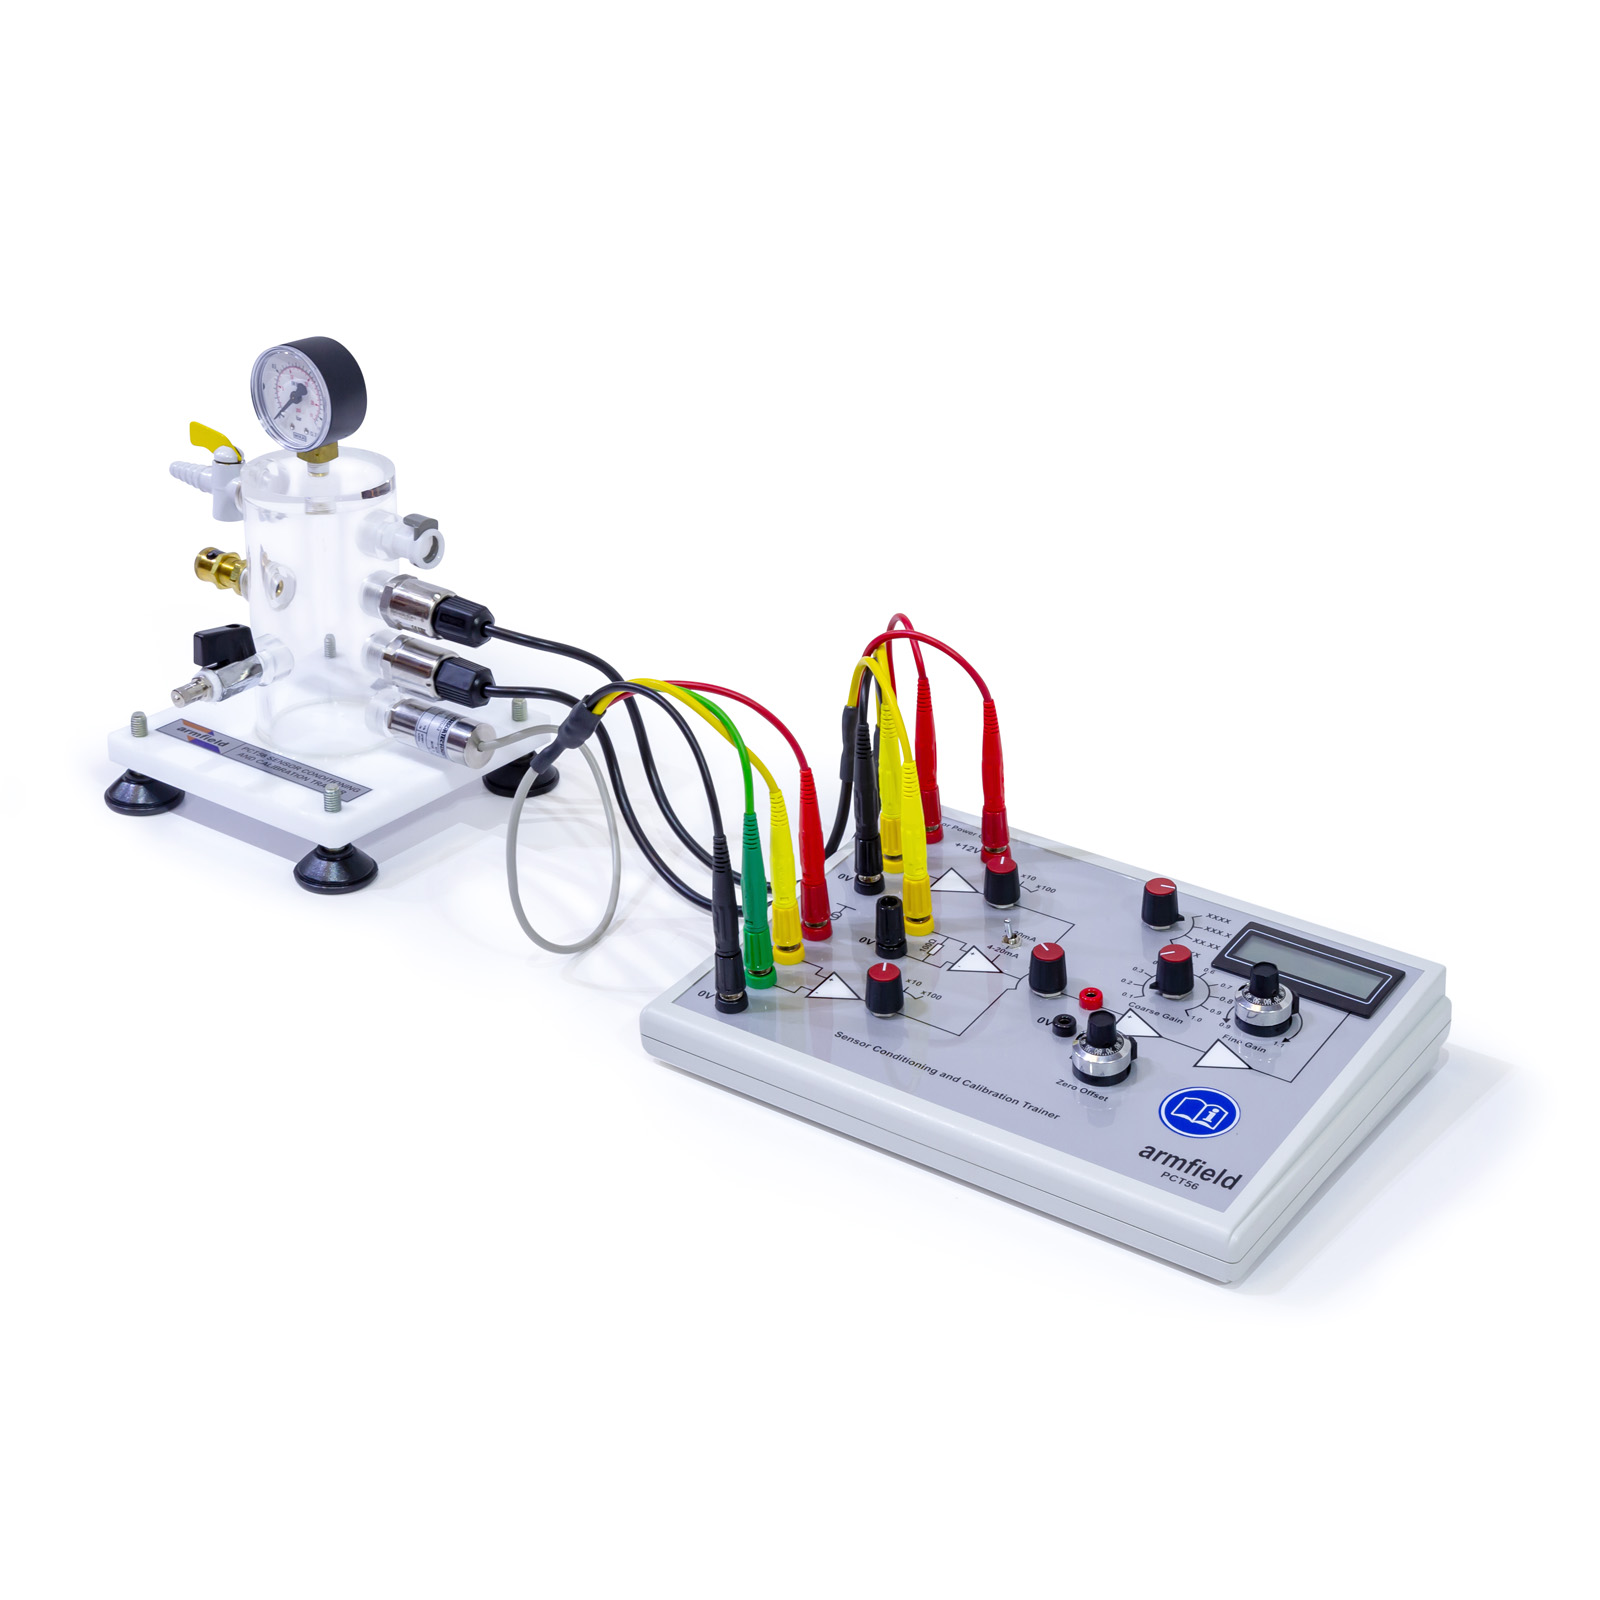 Sensor Conditioning and Calibration Trainer